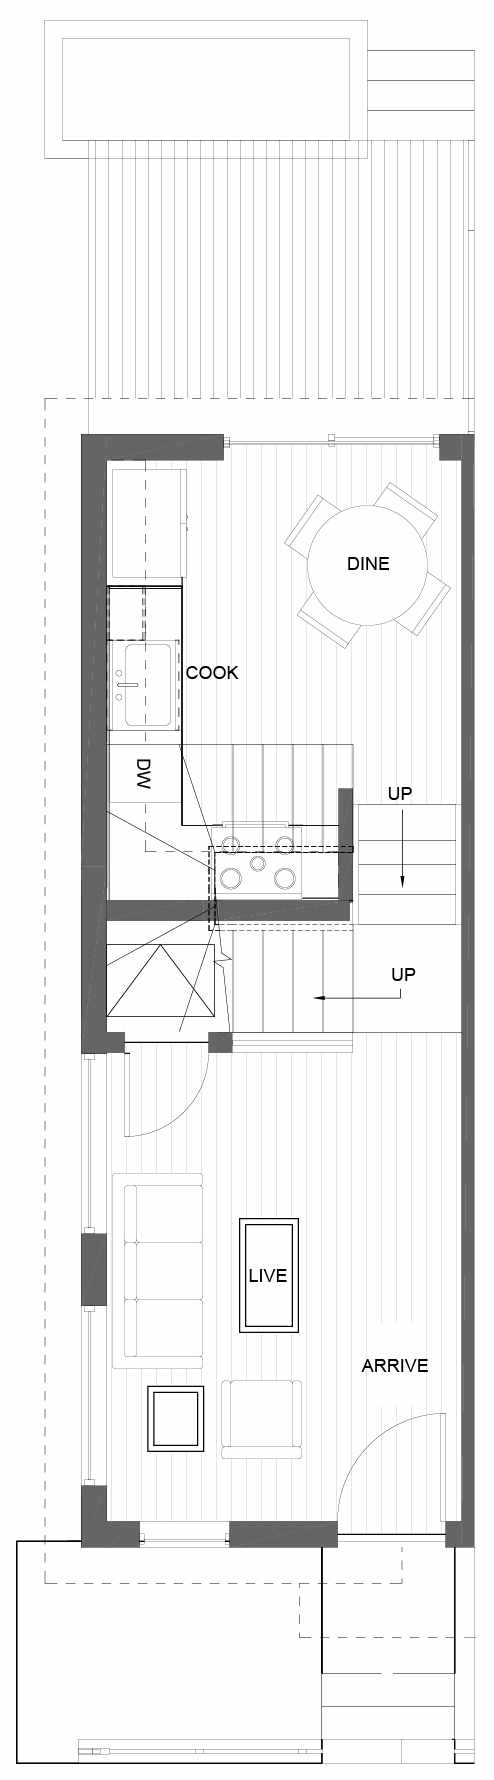 First Floor Plan of 3015A 30th Ave W, One of the Lochlan Townhomes by Isola Homes in Magnolia